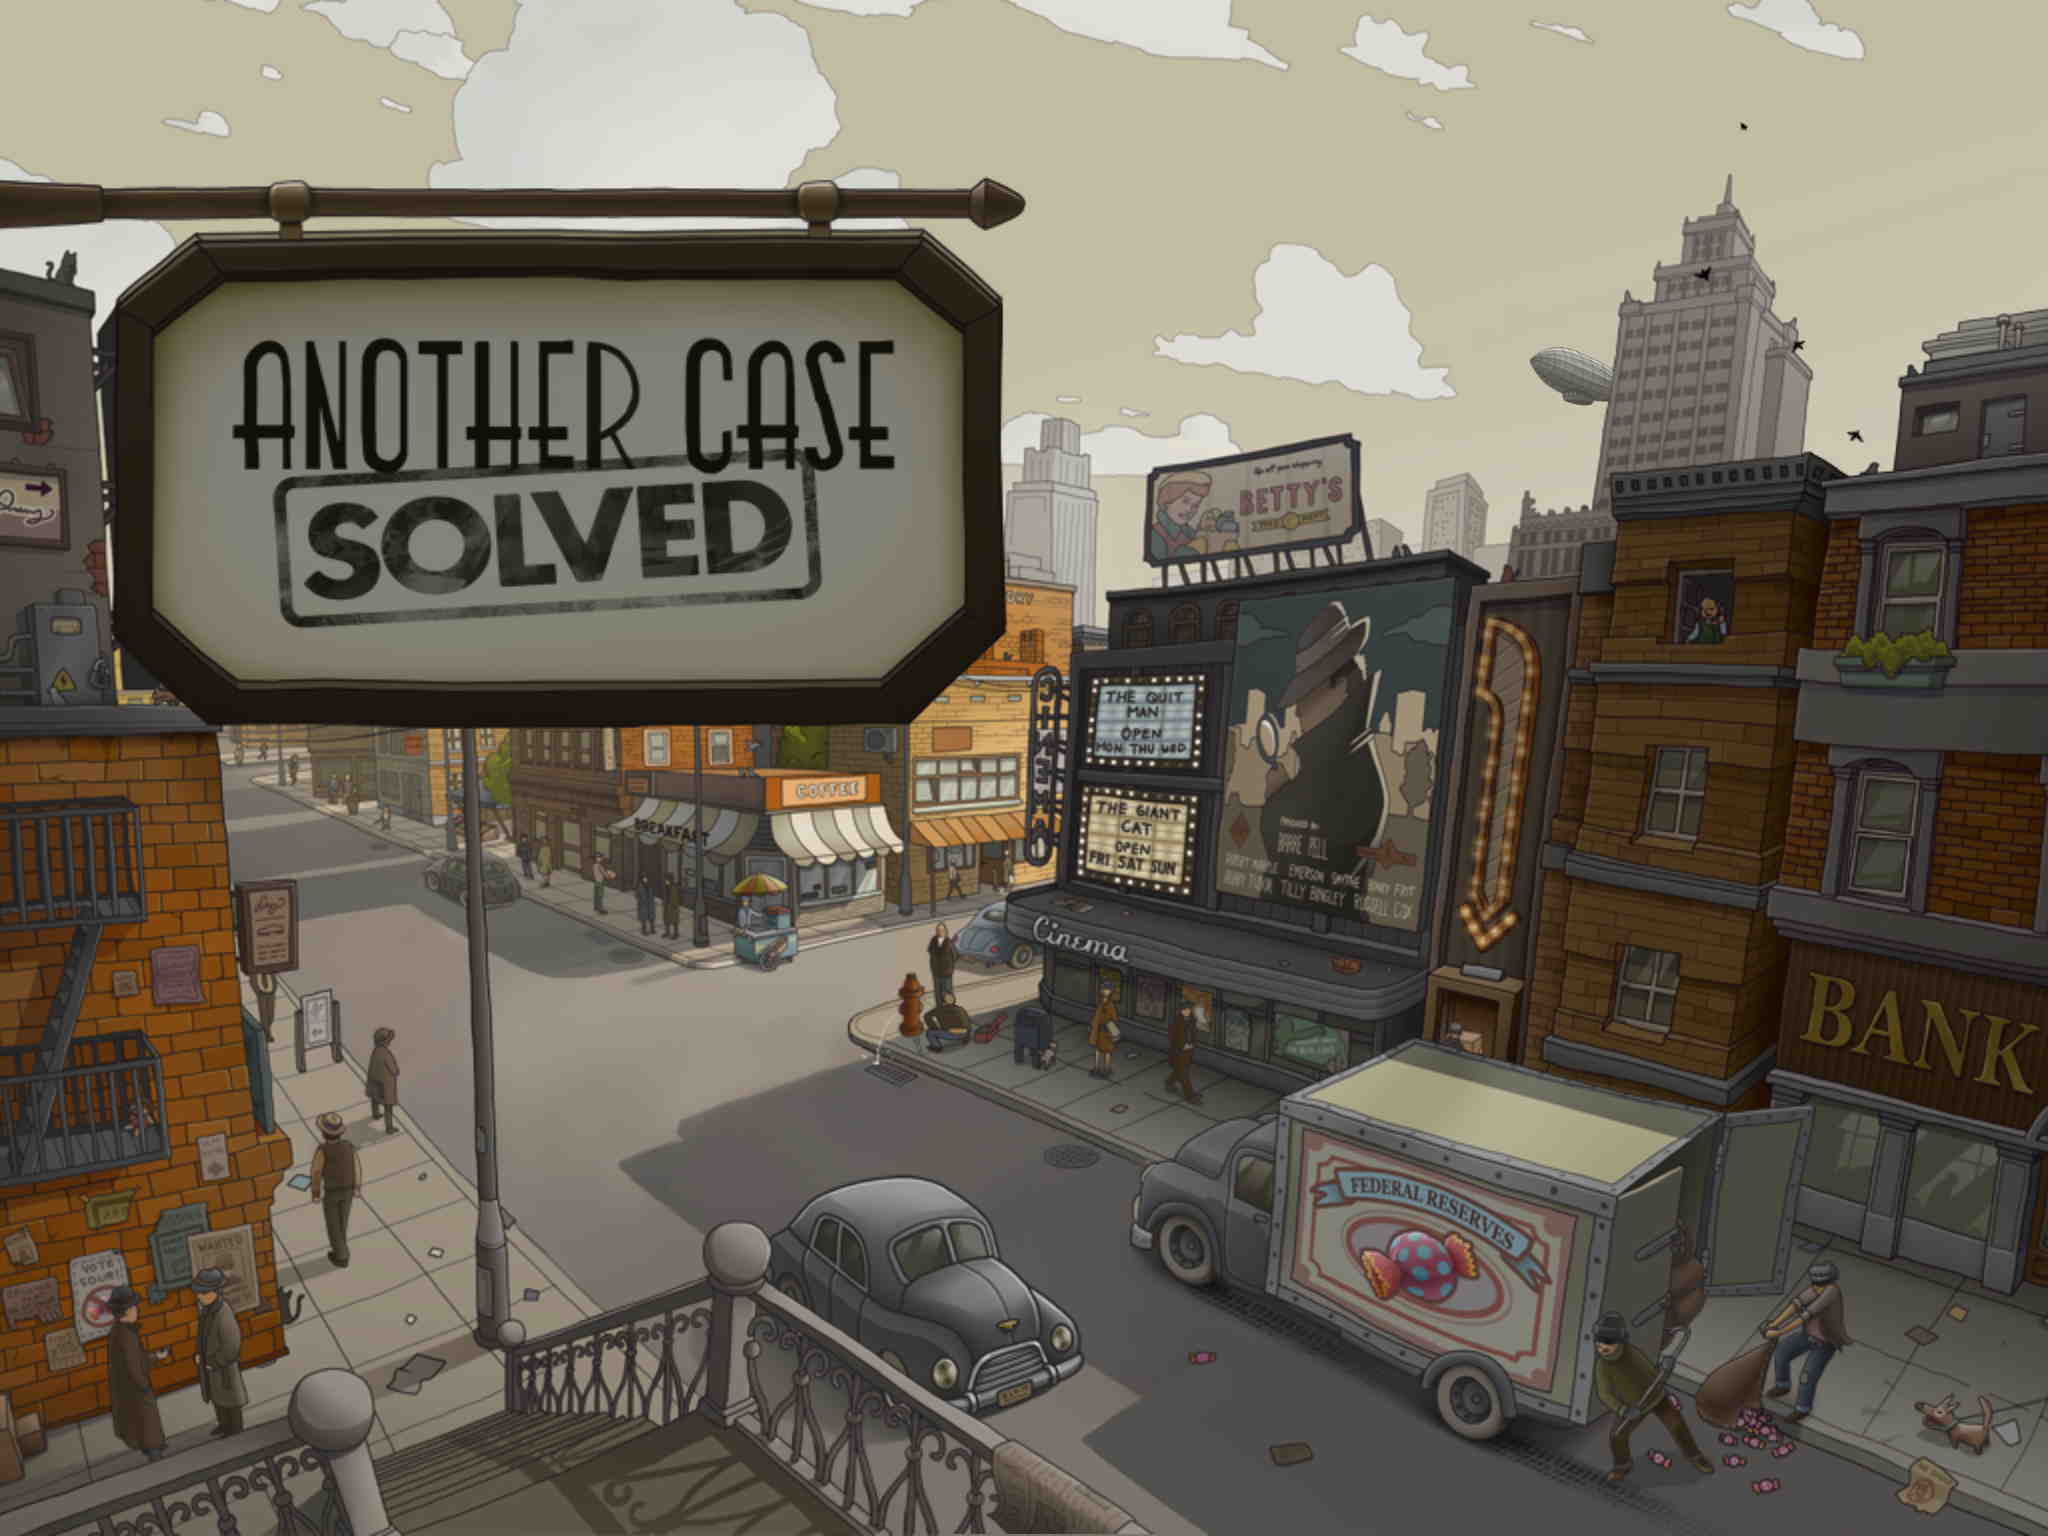 AnotherCaseSolved01